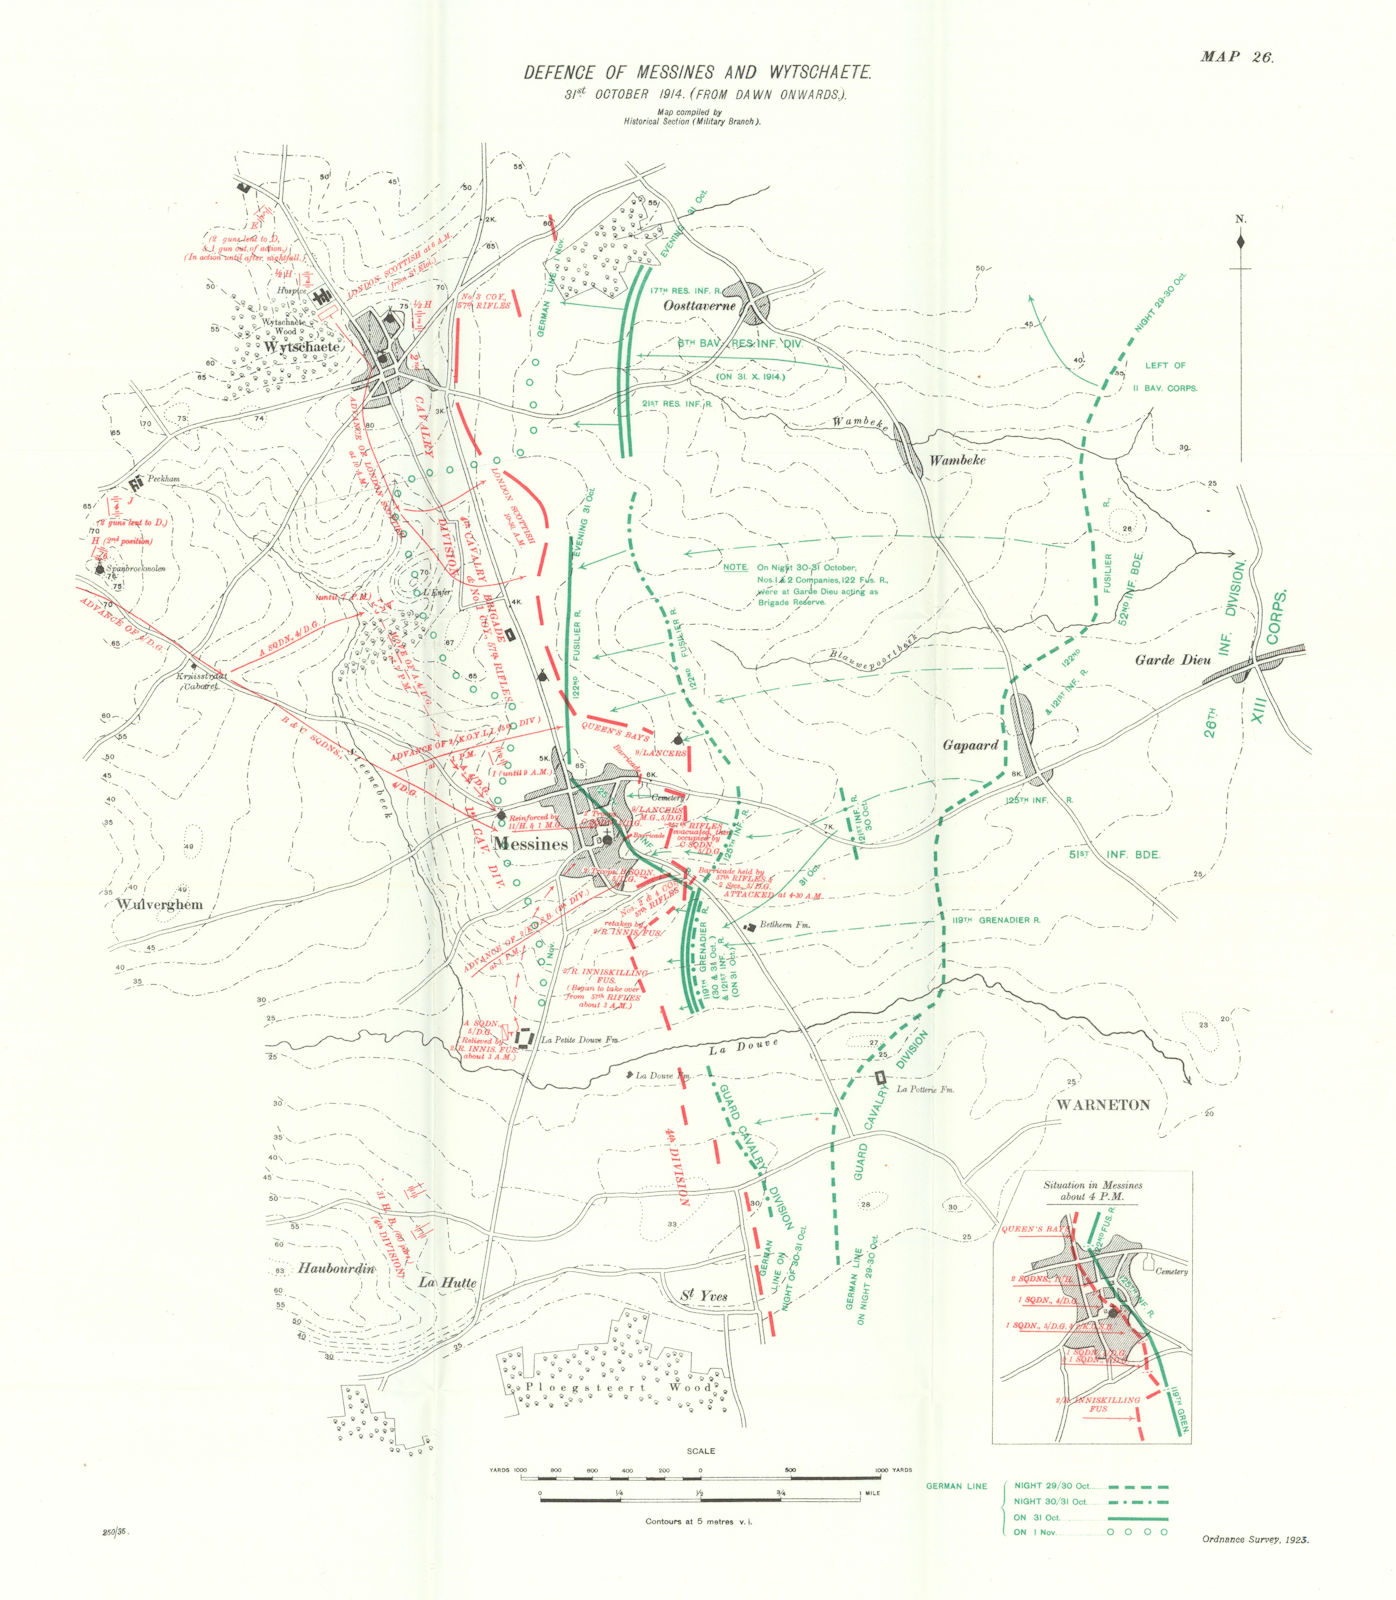 Defence of Messines & Wytschaete, 31st October 1914 from dawn. WW1. 1933 map